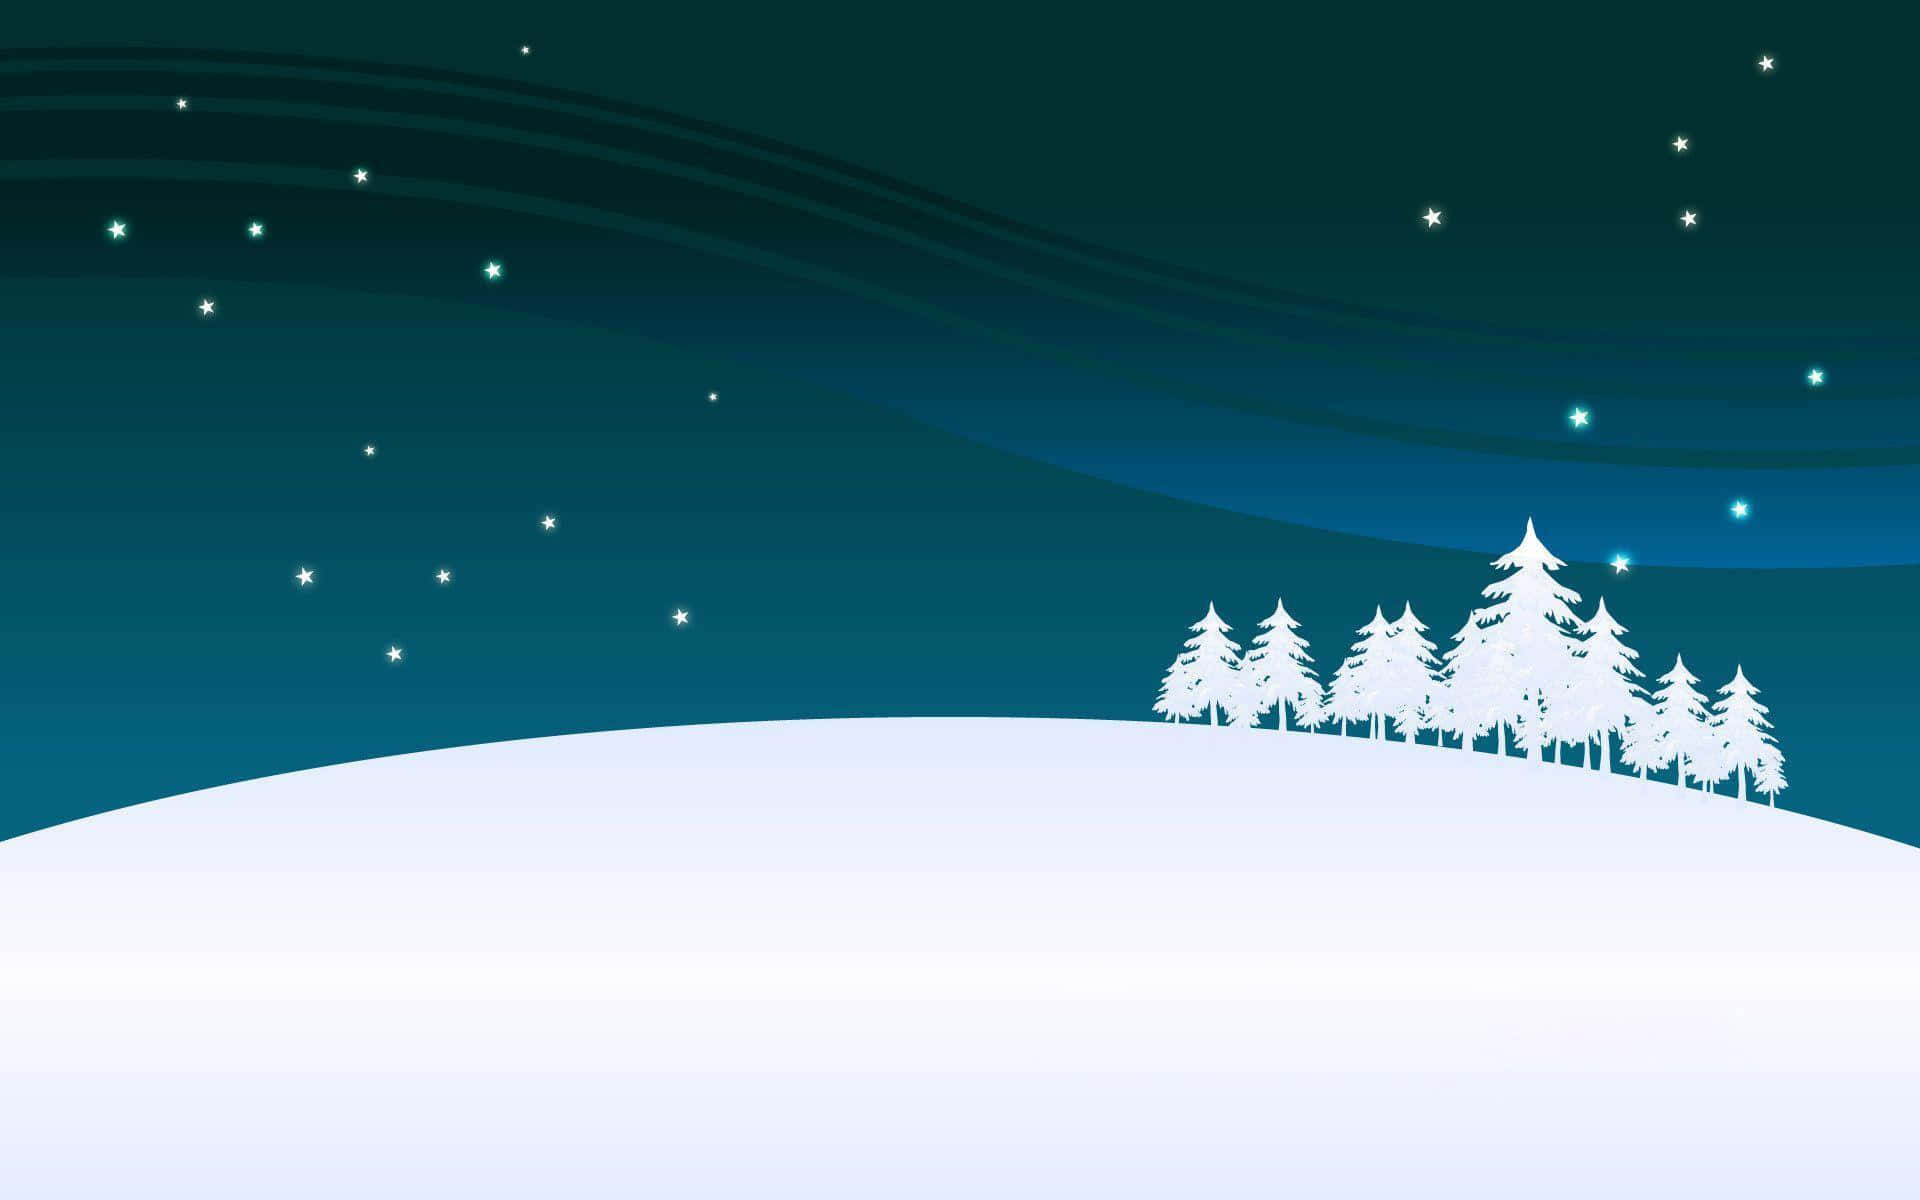 Winter Holiday Desktop With Pine Trees And Snowflakes Wallpaper